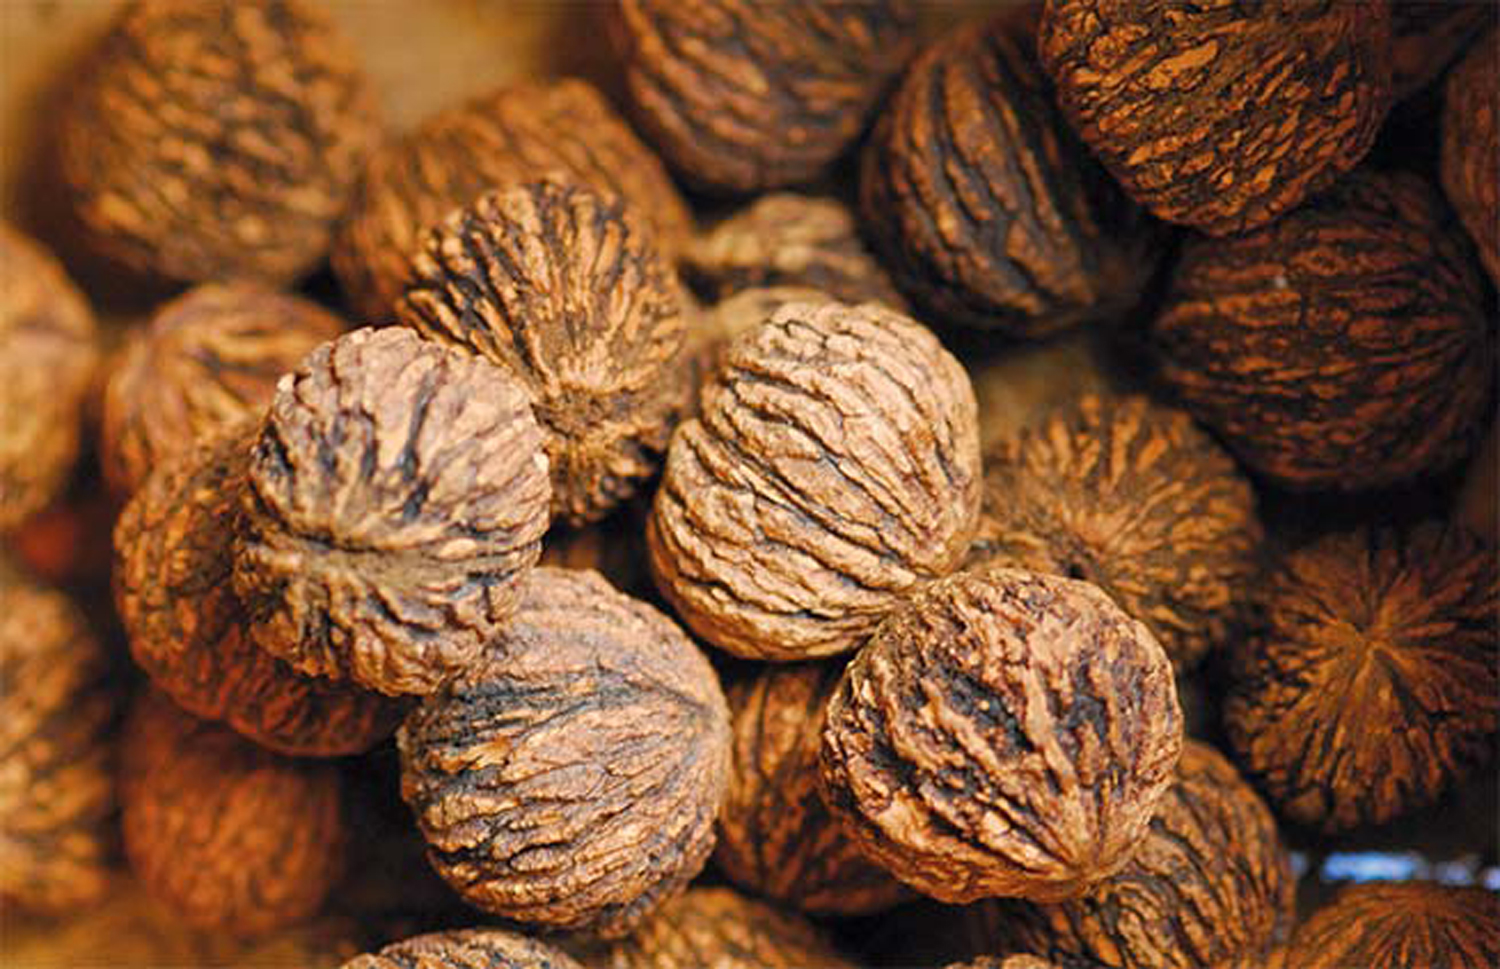 Black Walnuts Help in the Fight against Fungi, Parasites, and Heart Illness!